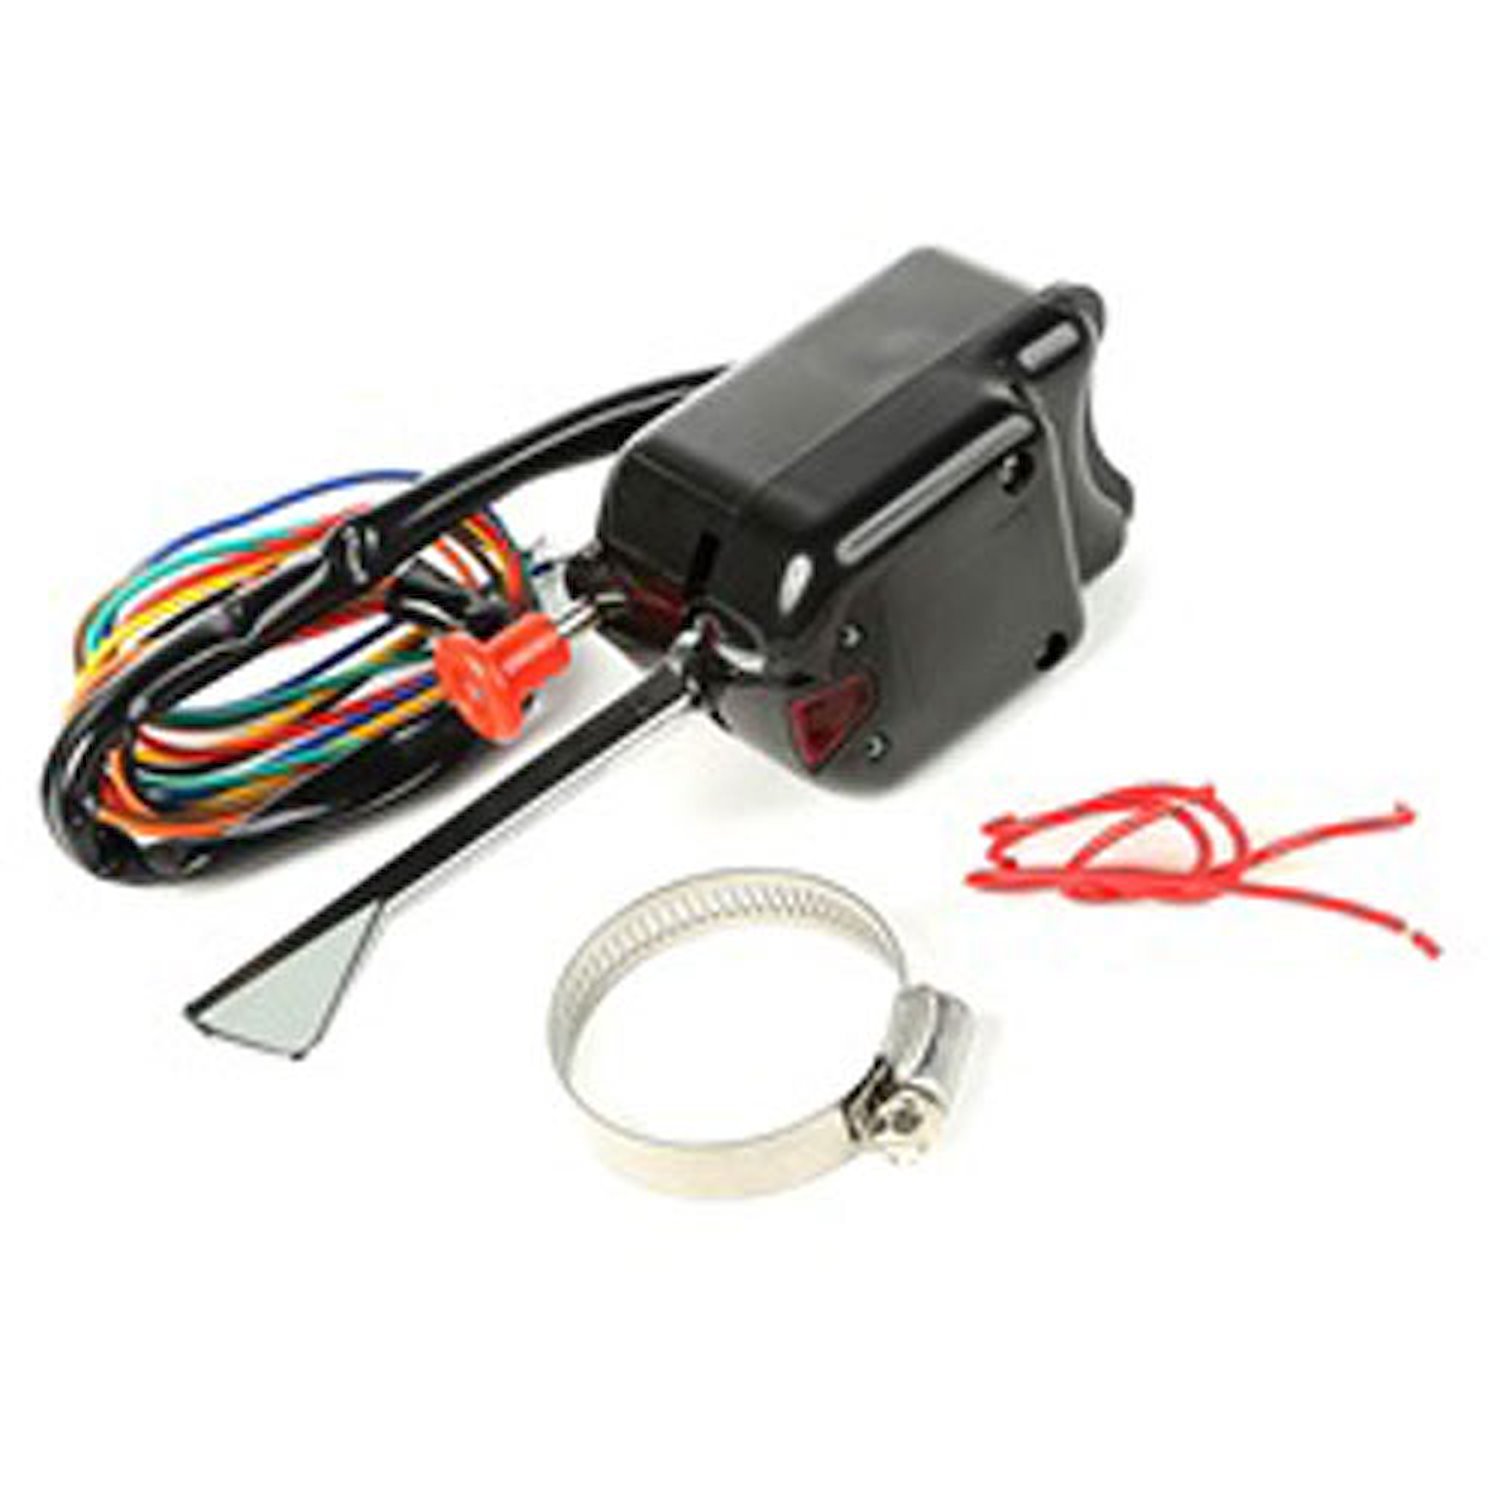 Black replacement turn signal switch kit from Omix-ADA includes wiring harness and built-in